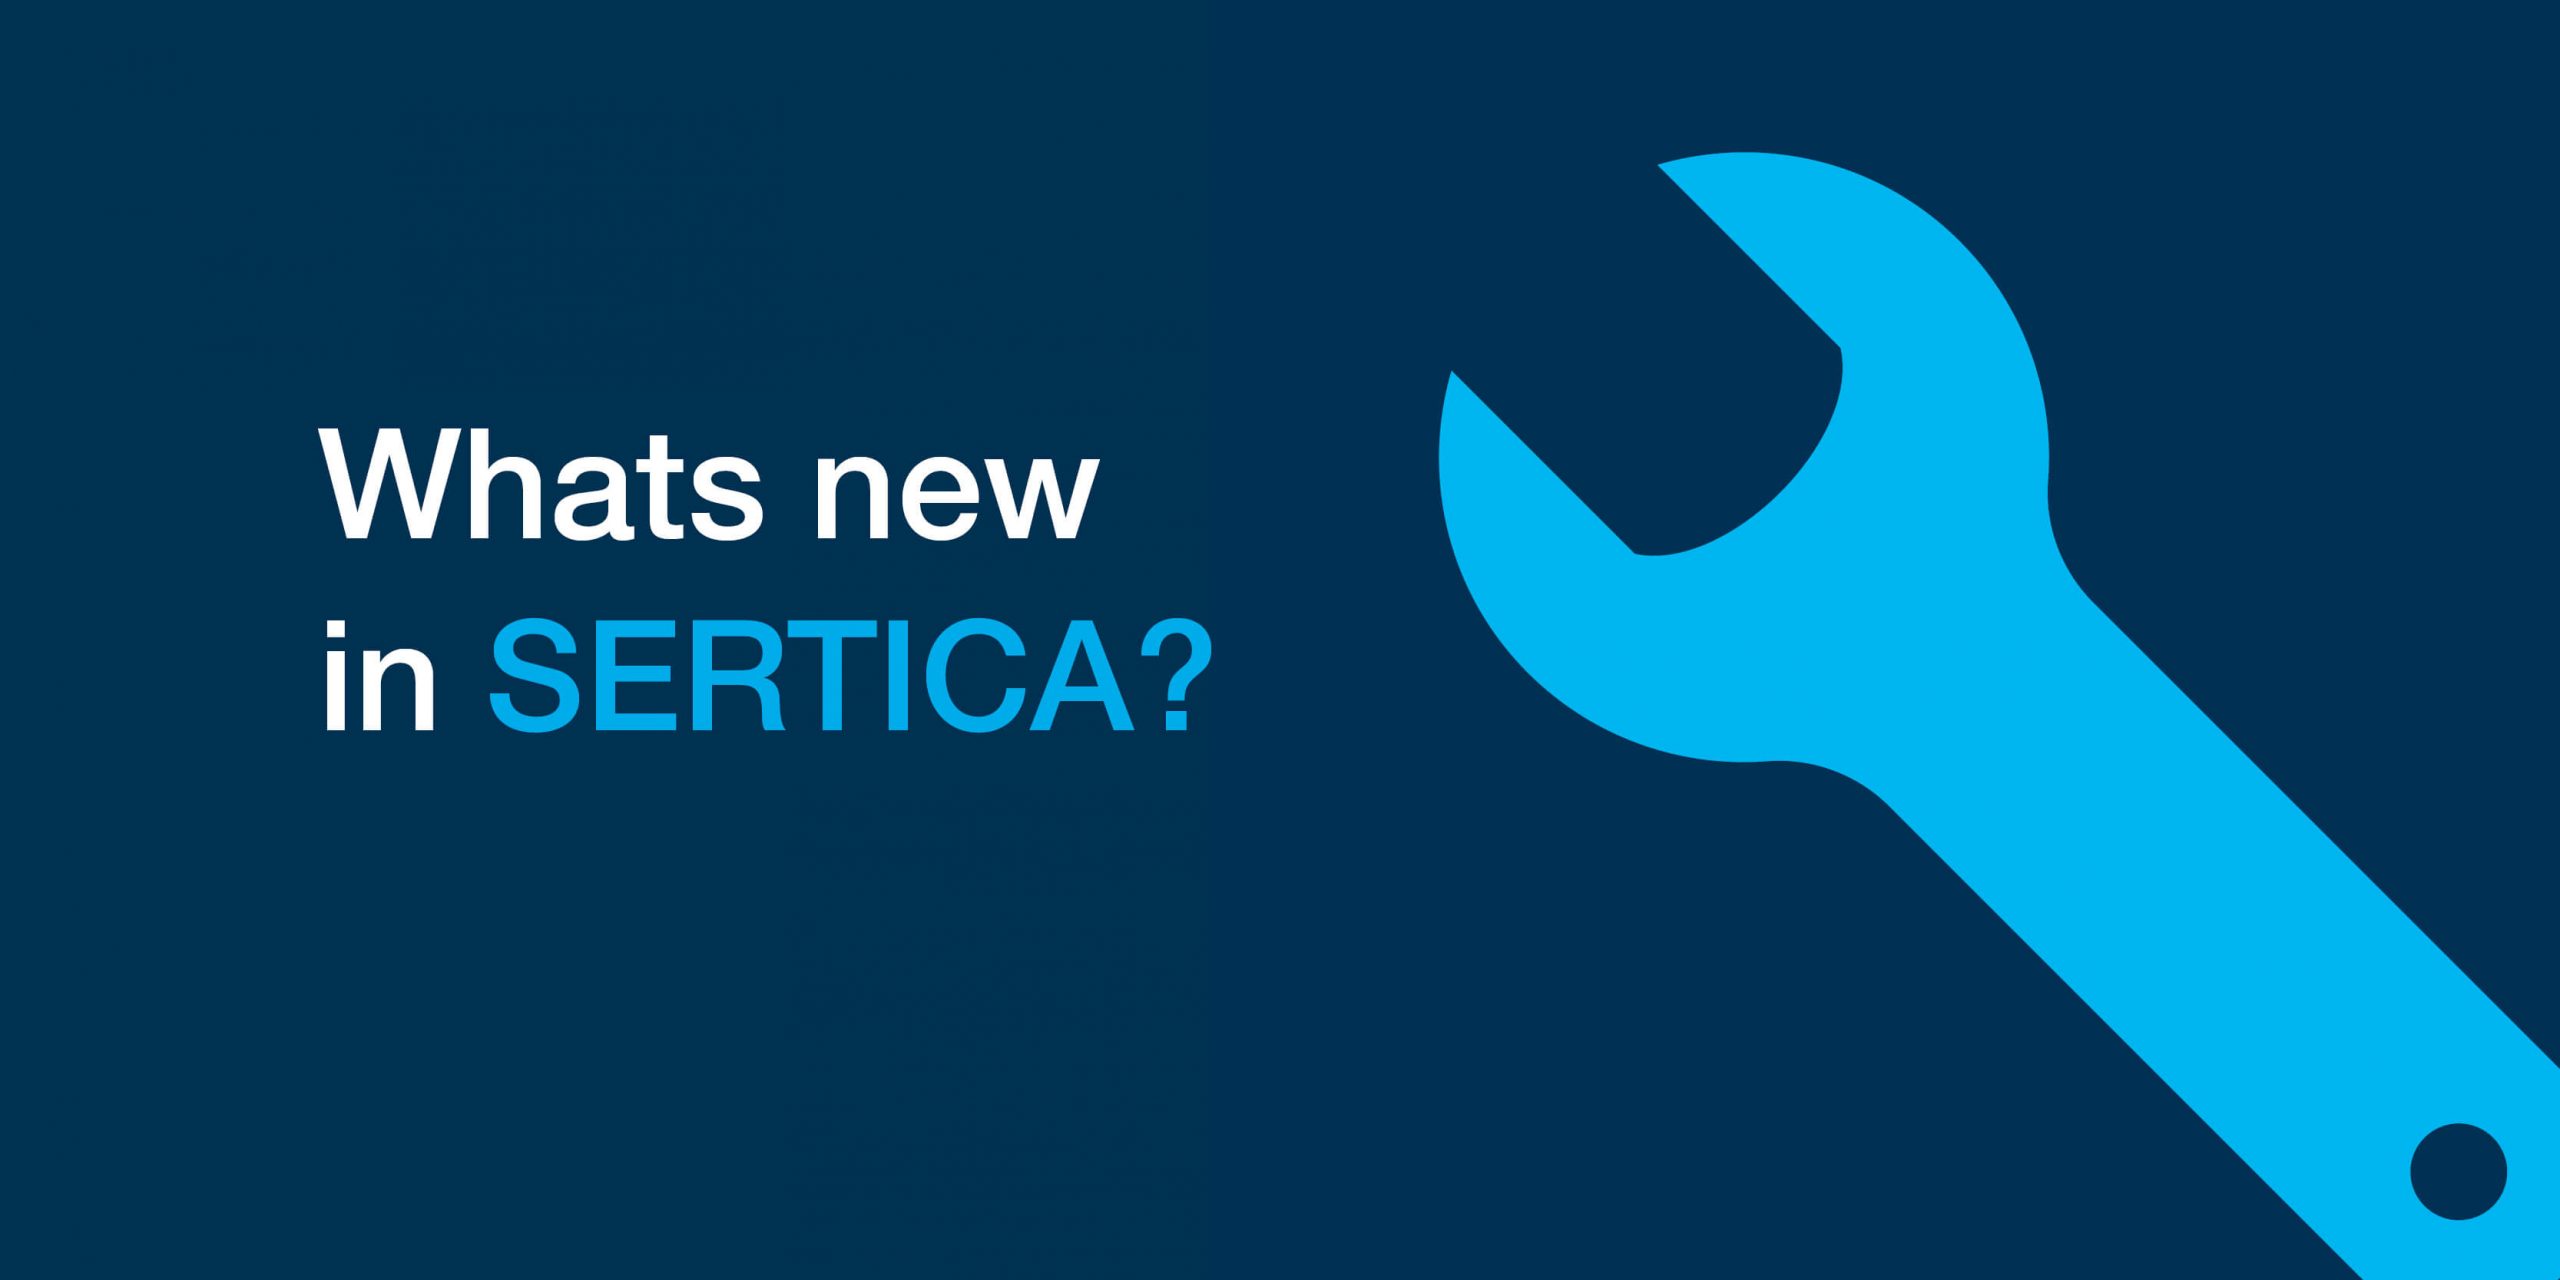 Graphic with text: Whats new in SERTICA?